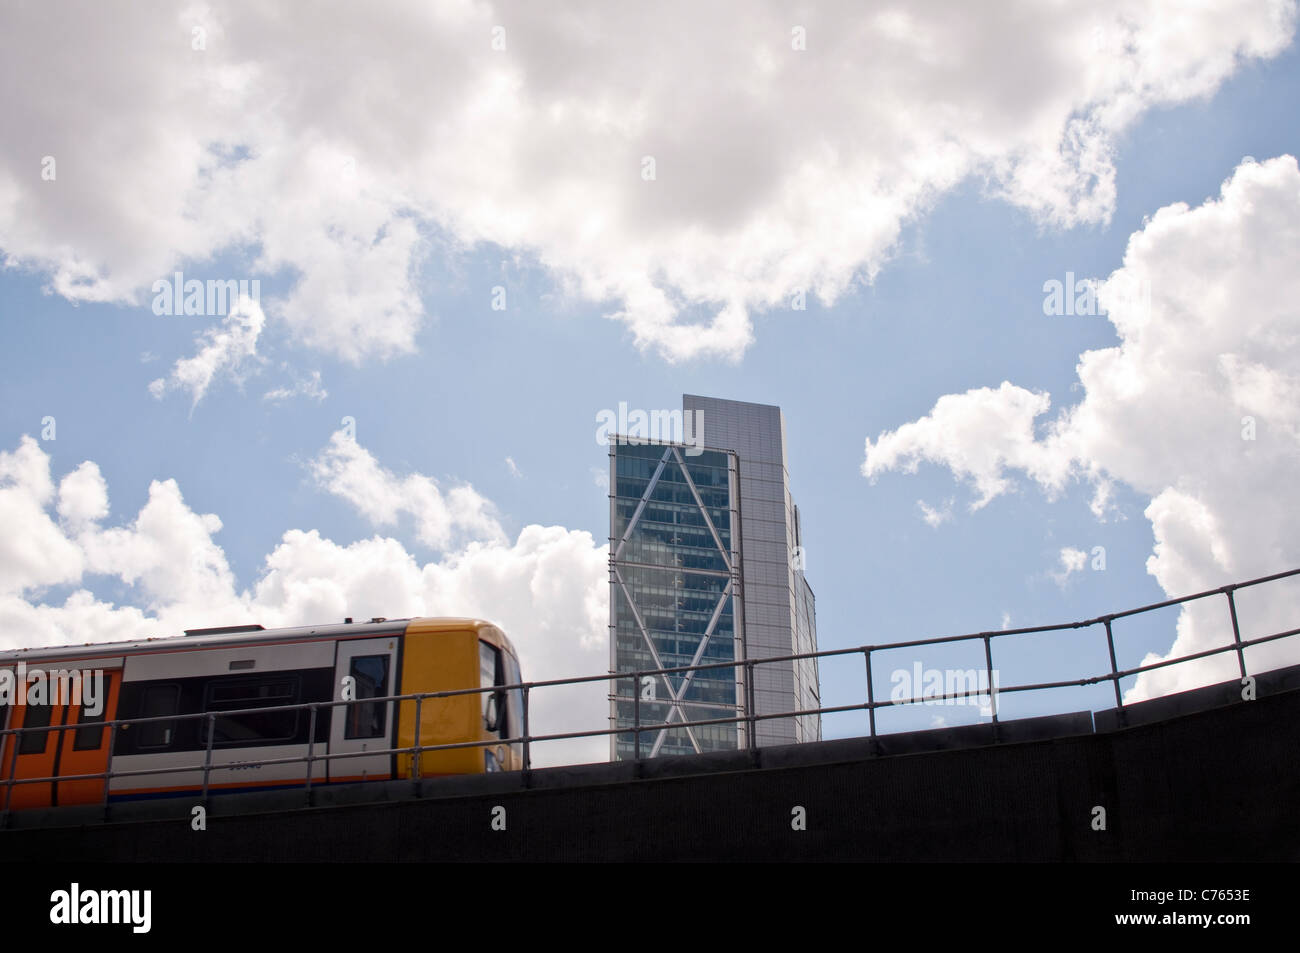 A train on the new East London Line extension passing through Shoreditch, Hackney. Broadgate Tower is visible in the background. Stock Photo